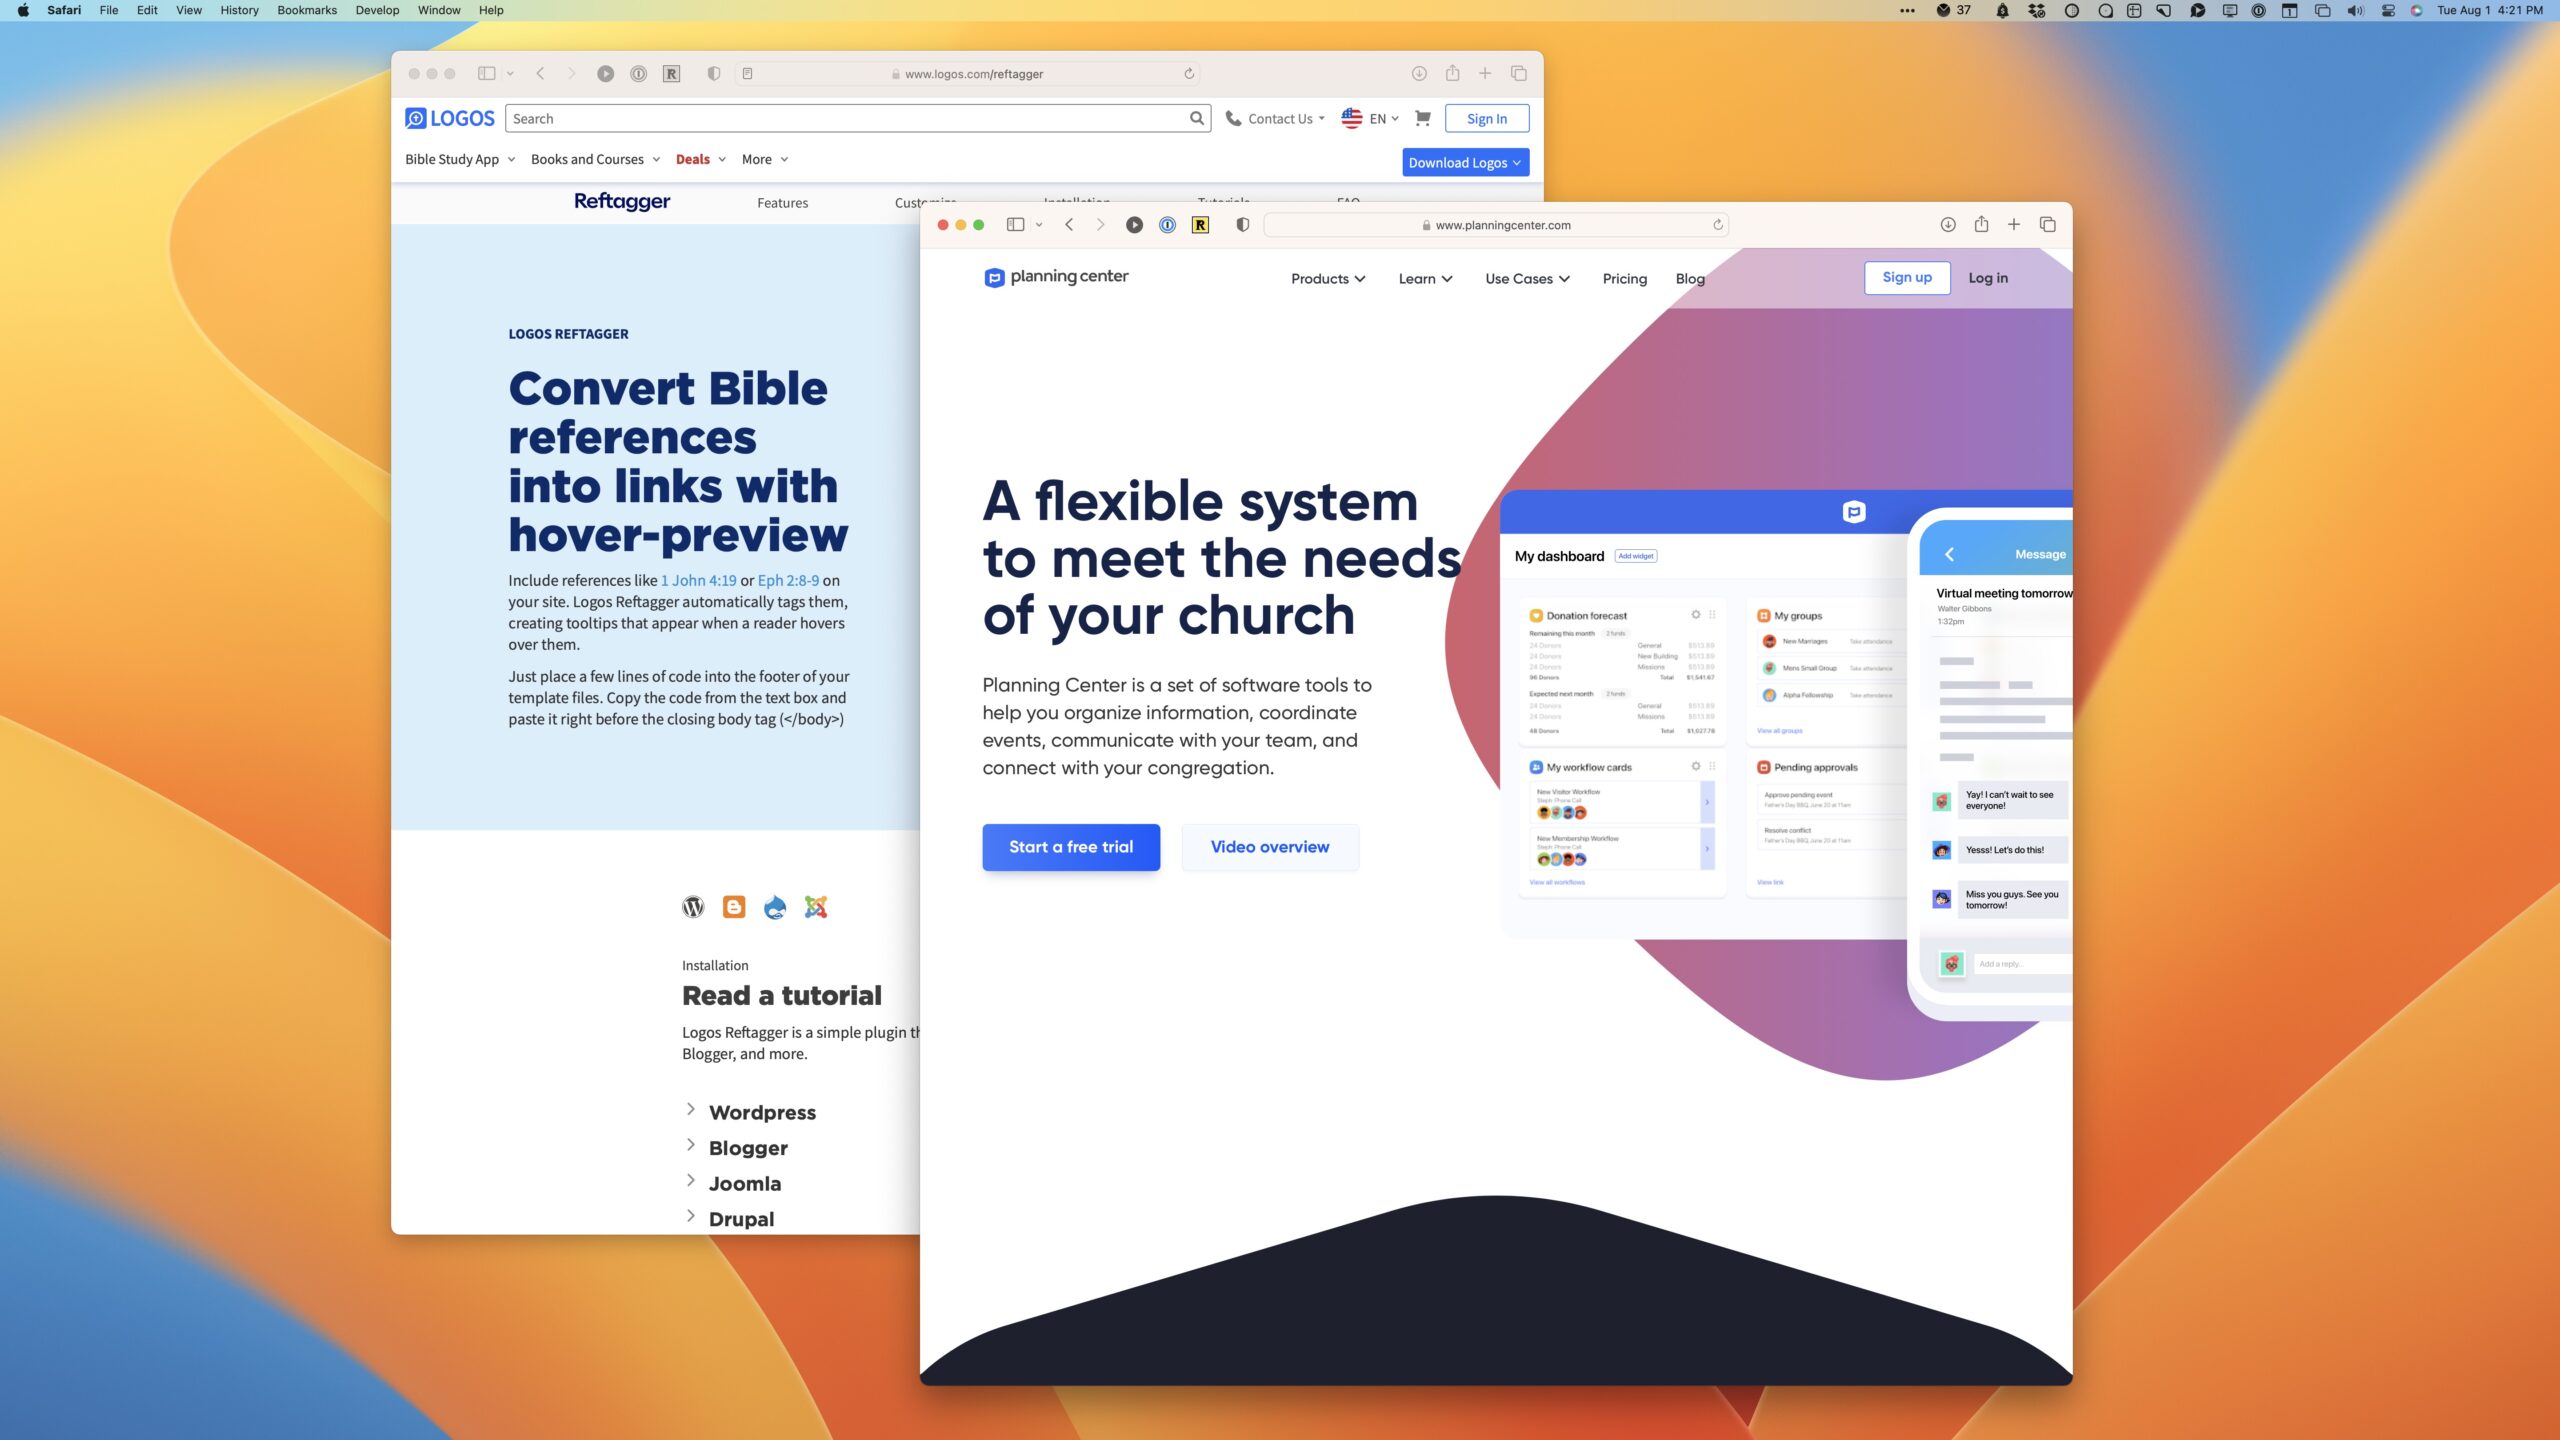 A screen shot of a digital church website with a blue and orange background.